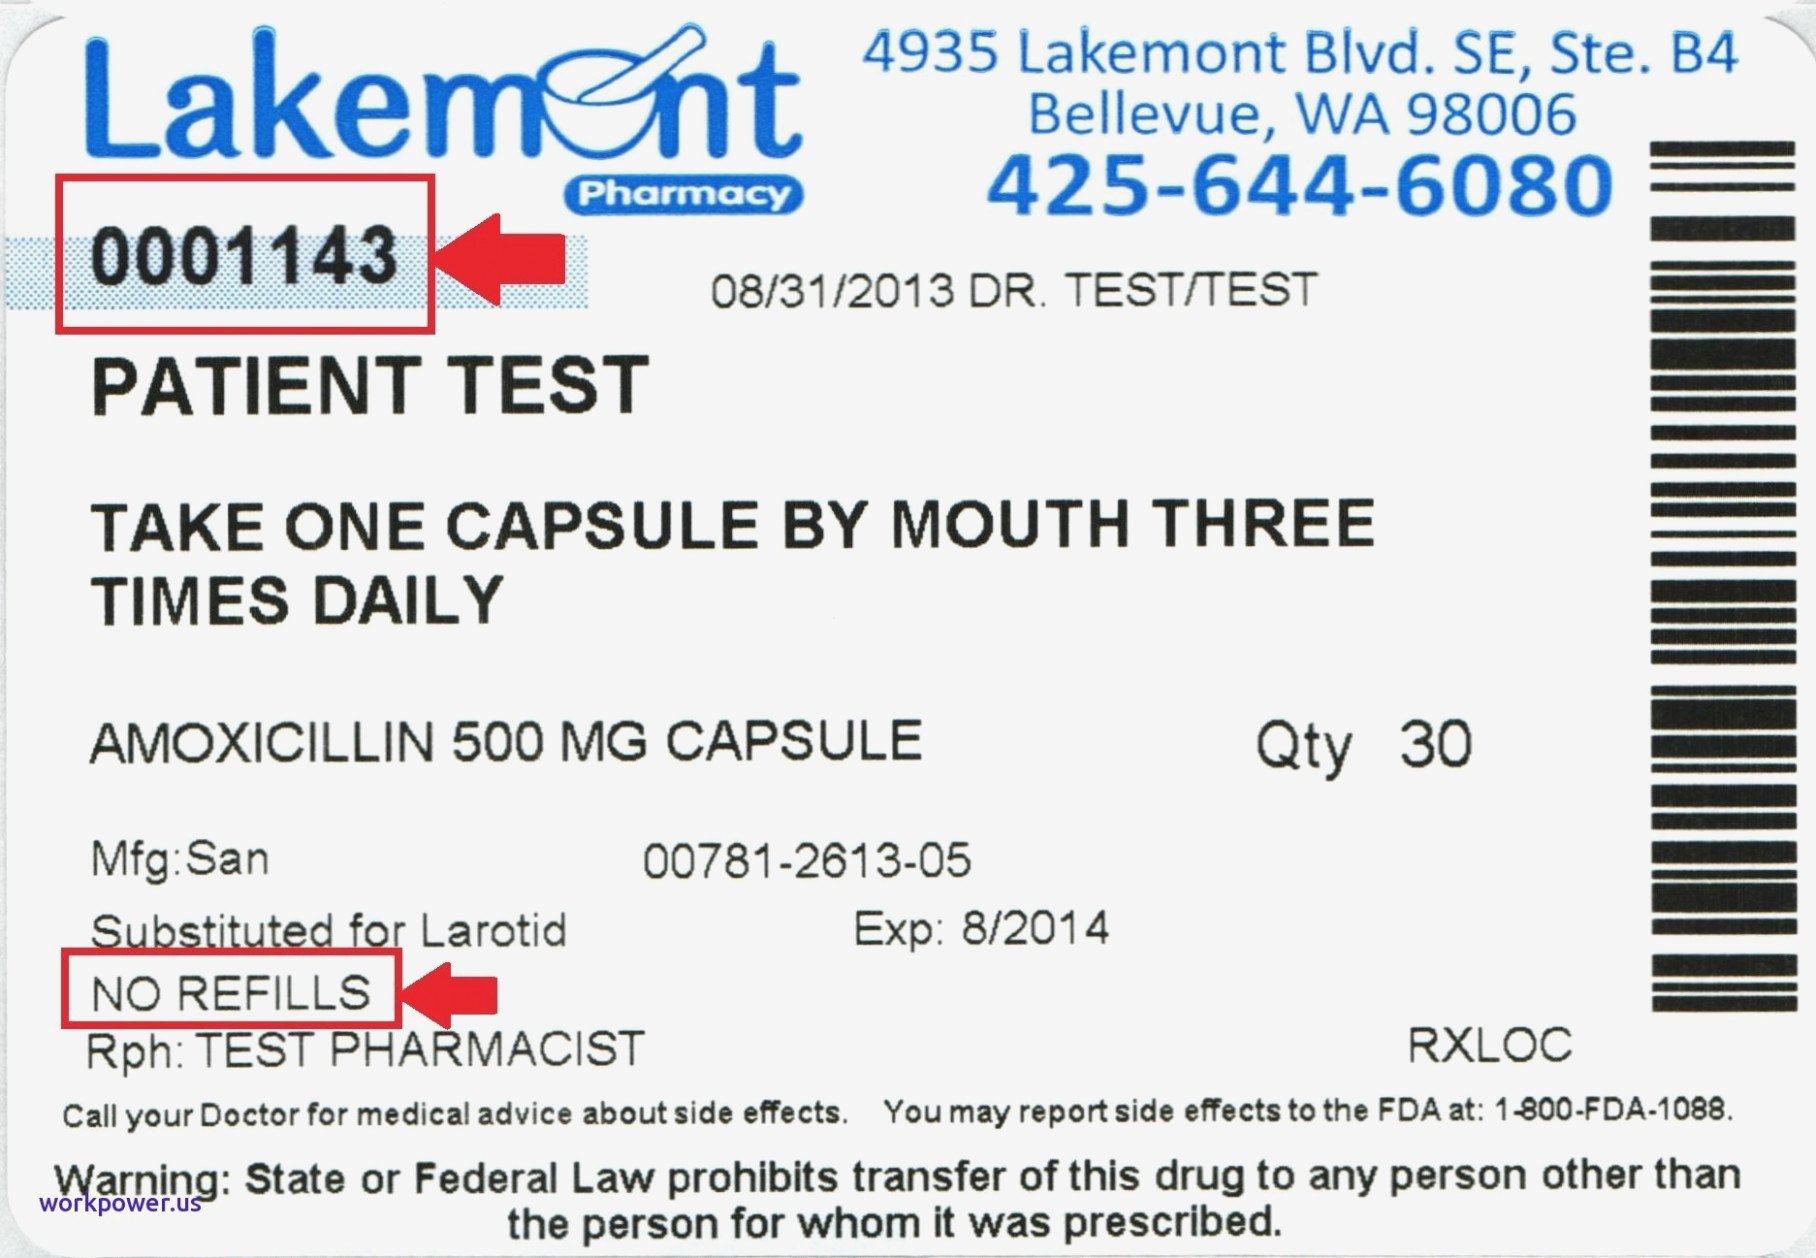 Fake Prescription Label Generator 15 Things to Know About Fake